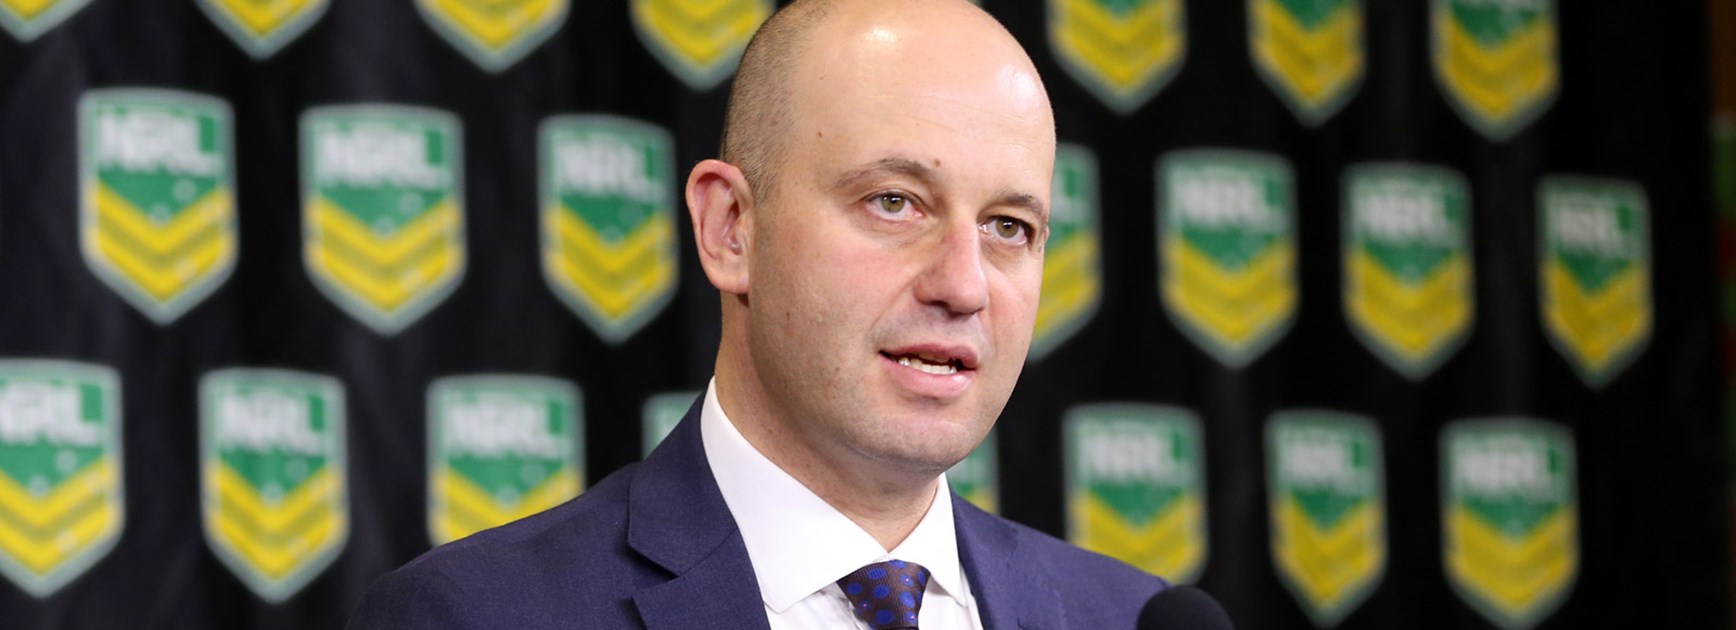 NRL CEO Todd Greenberg at the announcement of the preliminary findings of the Eels salary cap investigation.